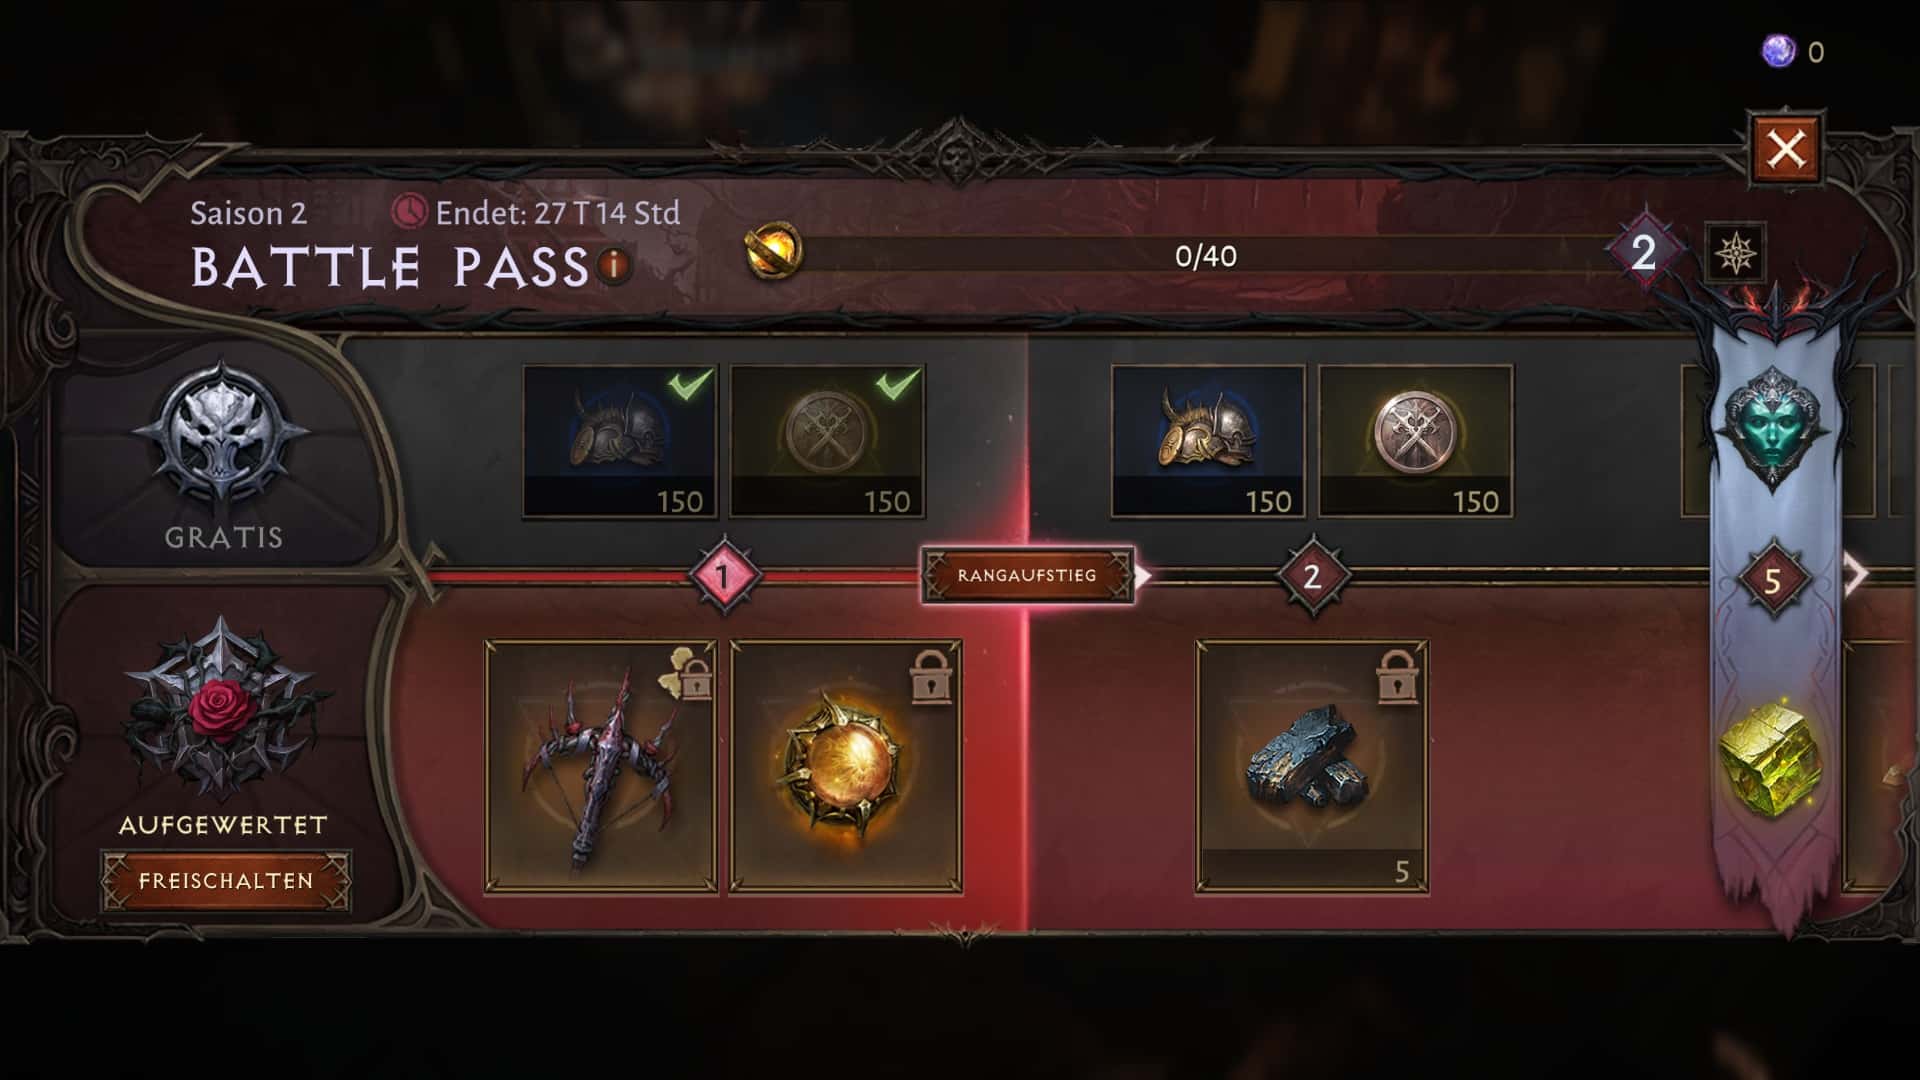 (With Season 2, the Battle Pass was reset and equipped with new rewards)